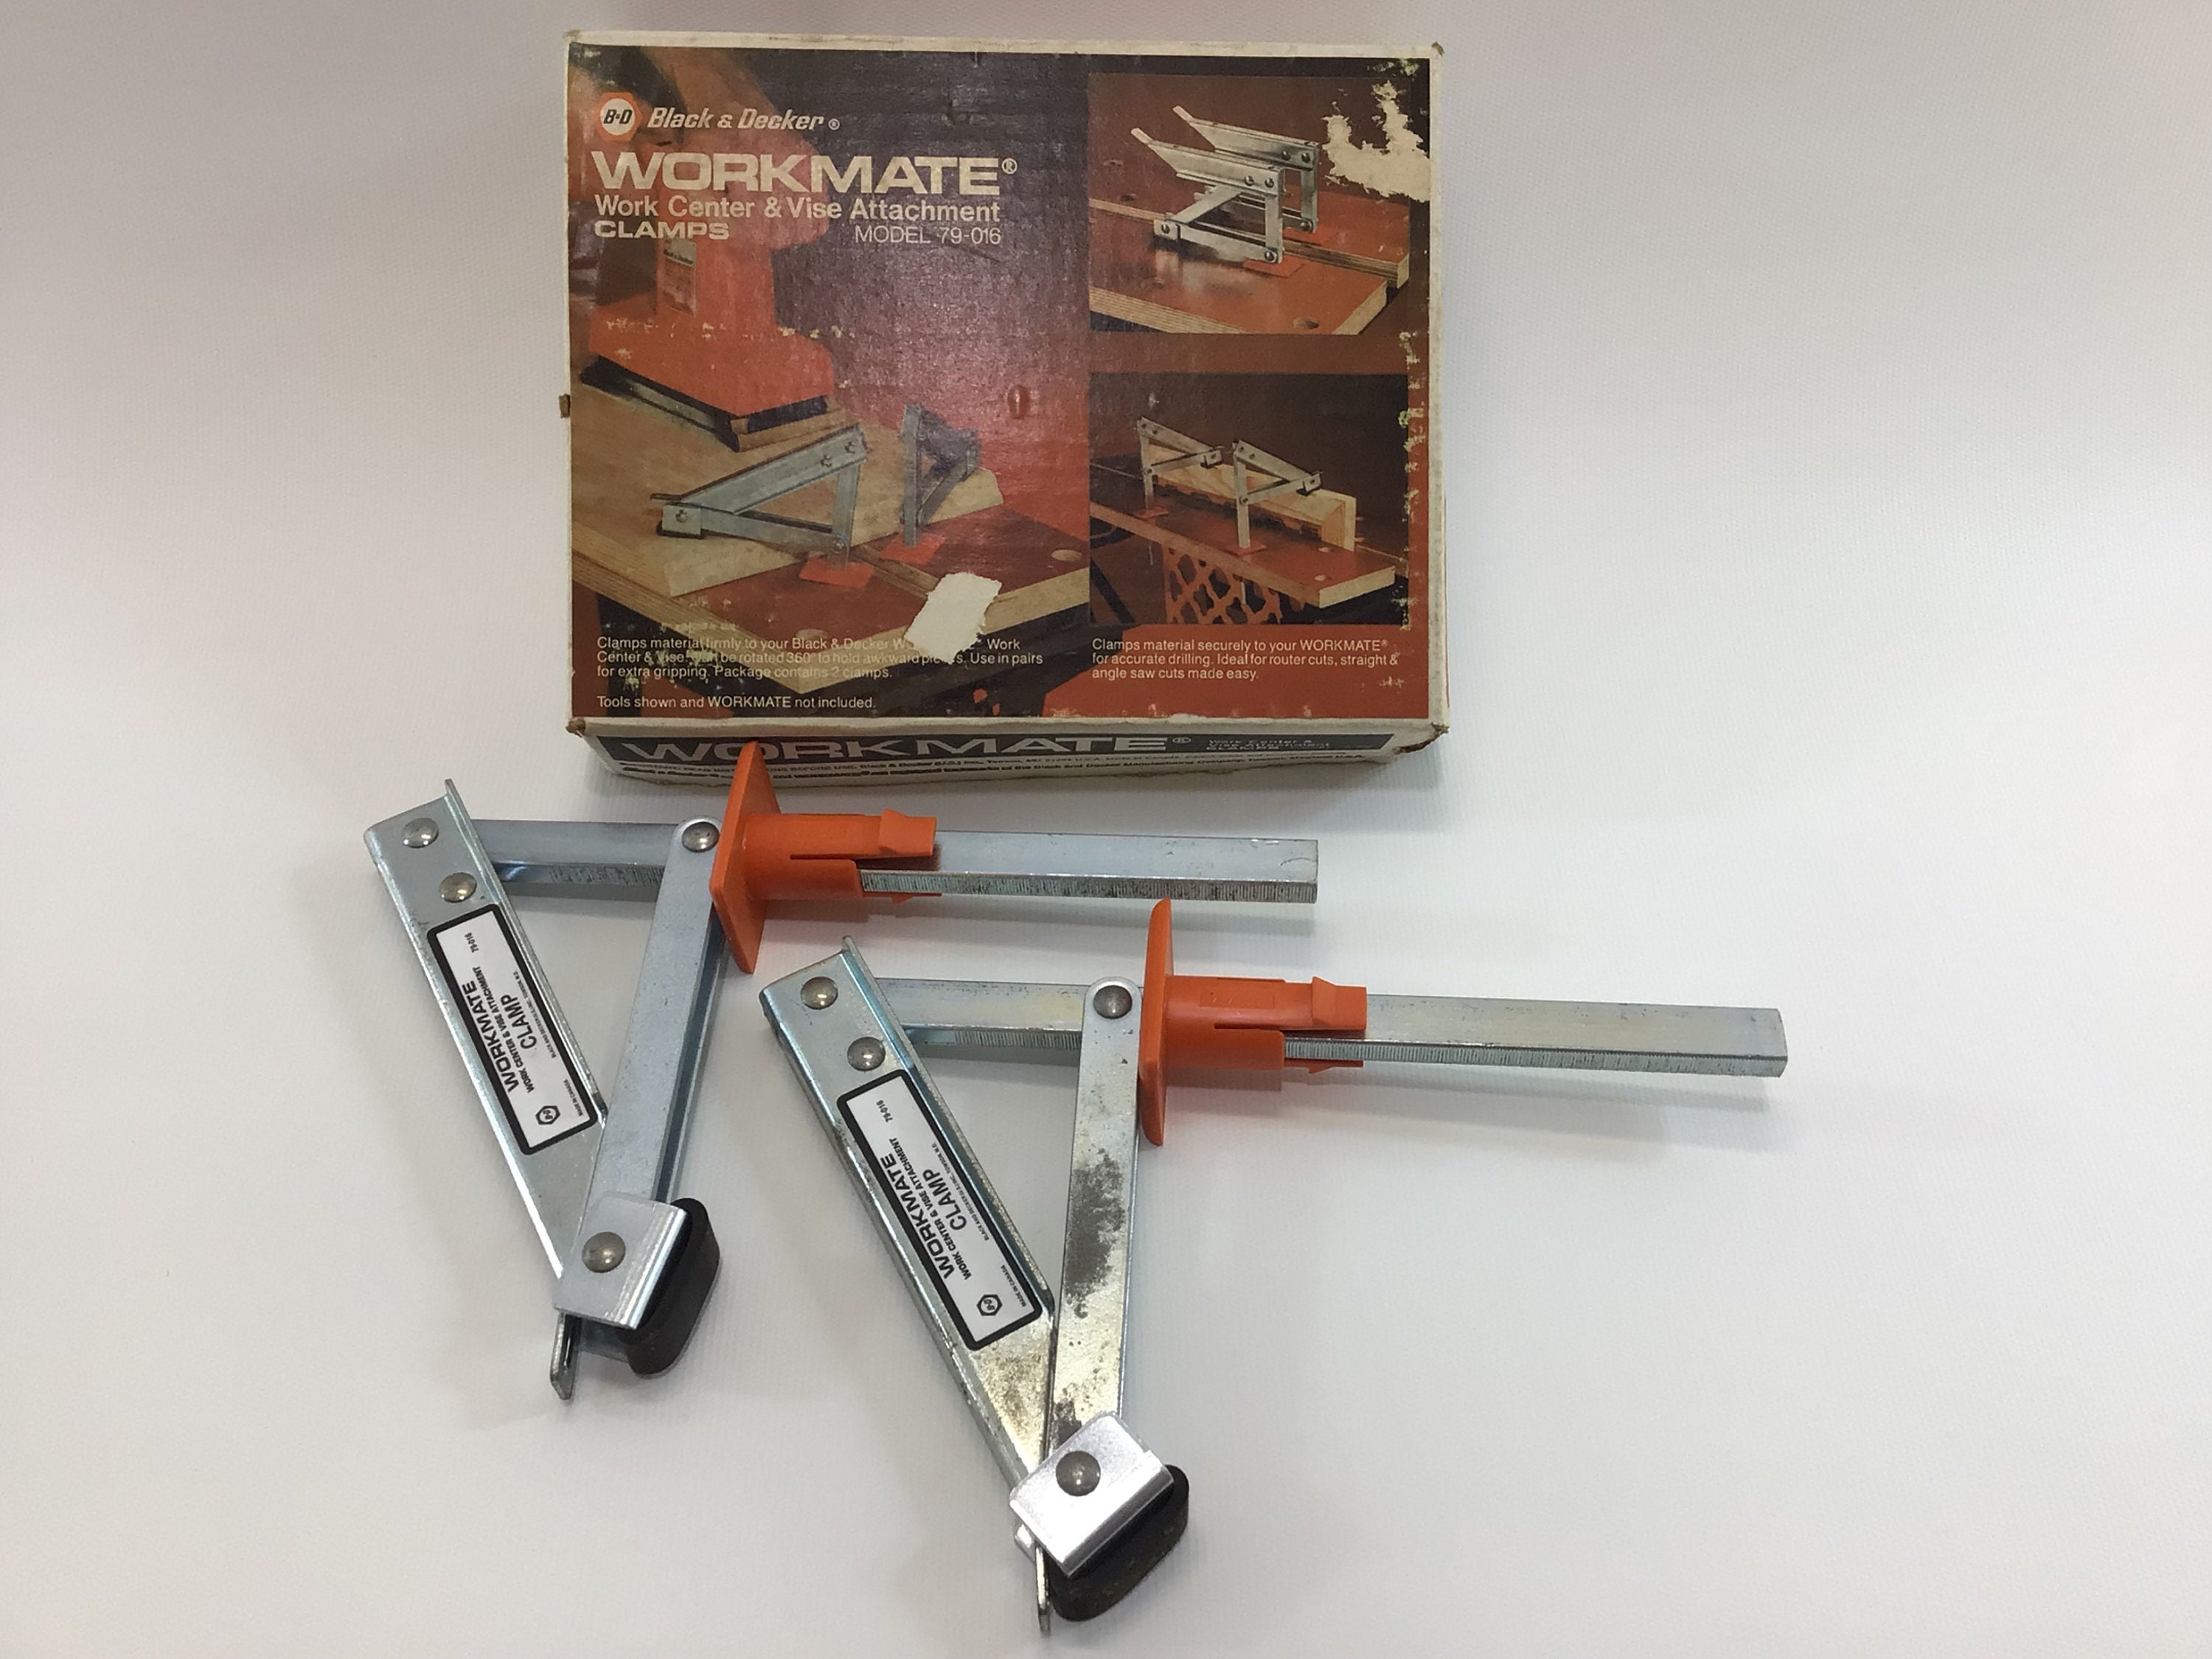 Workmate Work Center & Vise Attachment Clamps Model 79-016